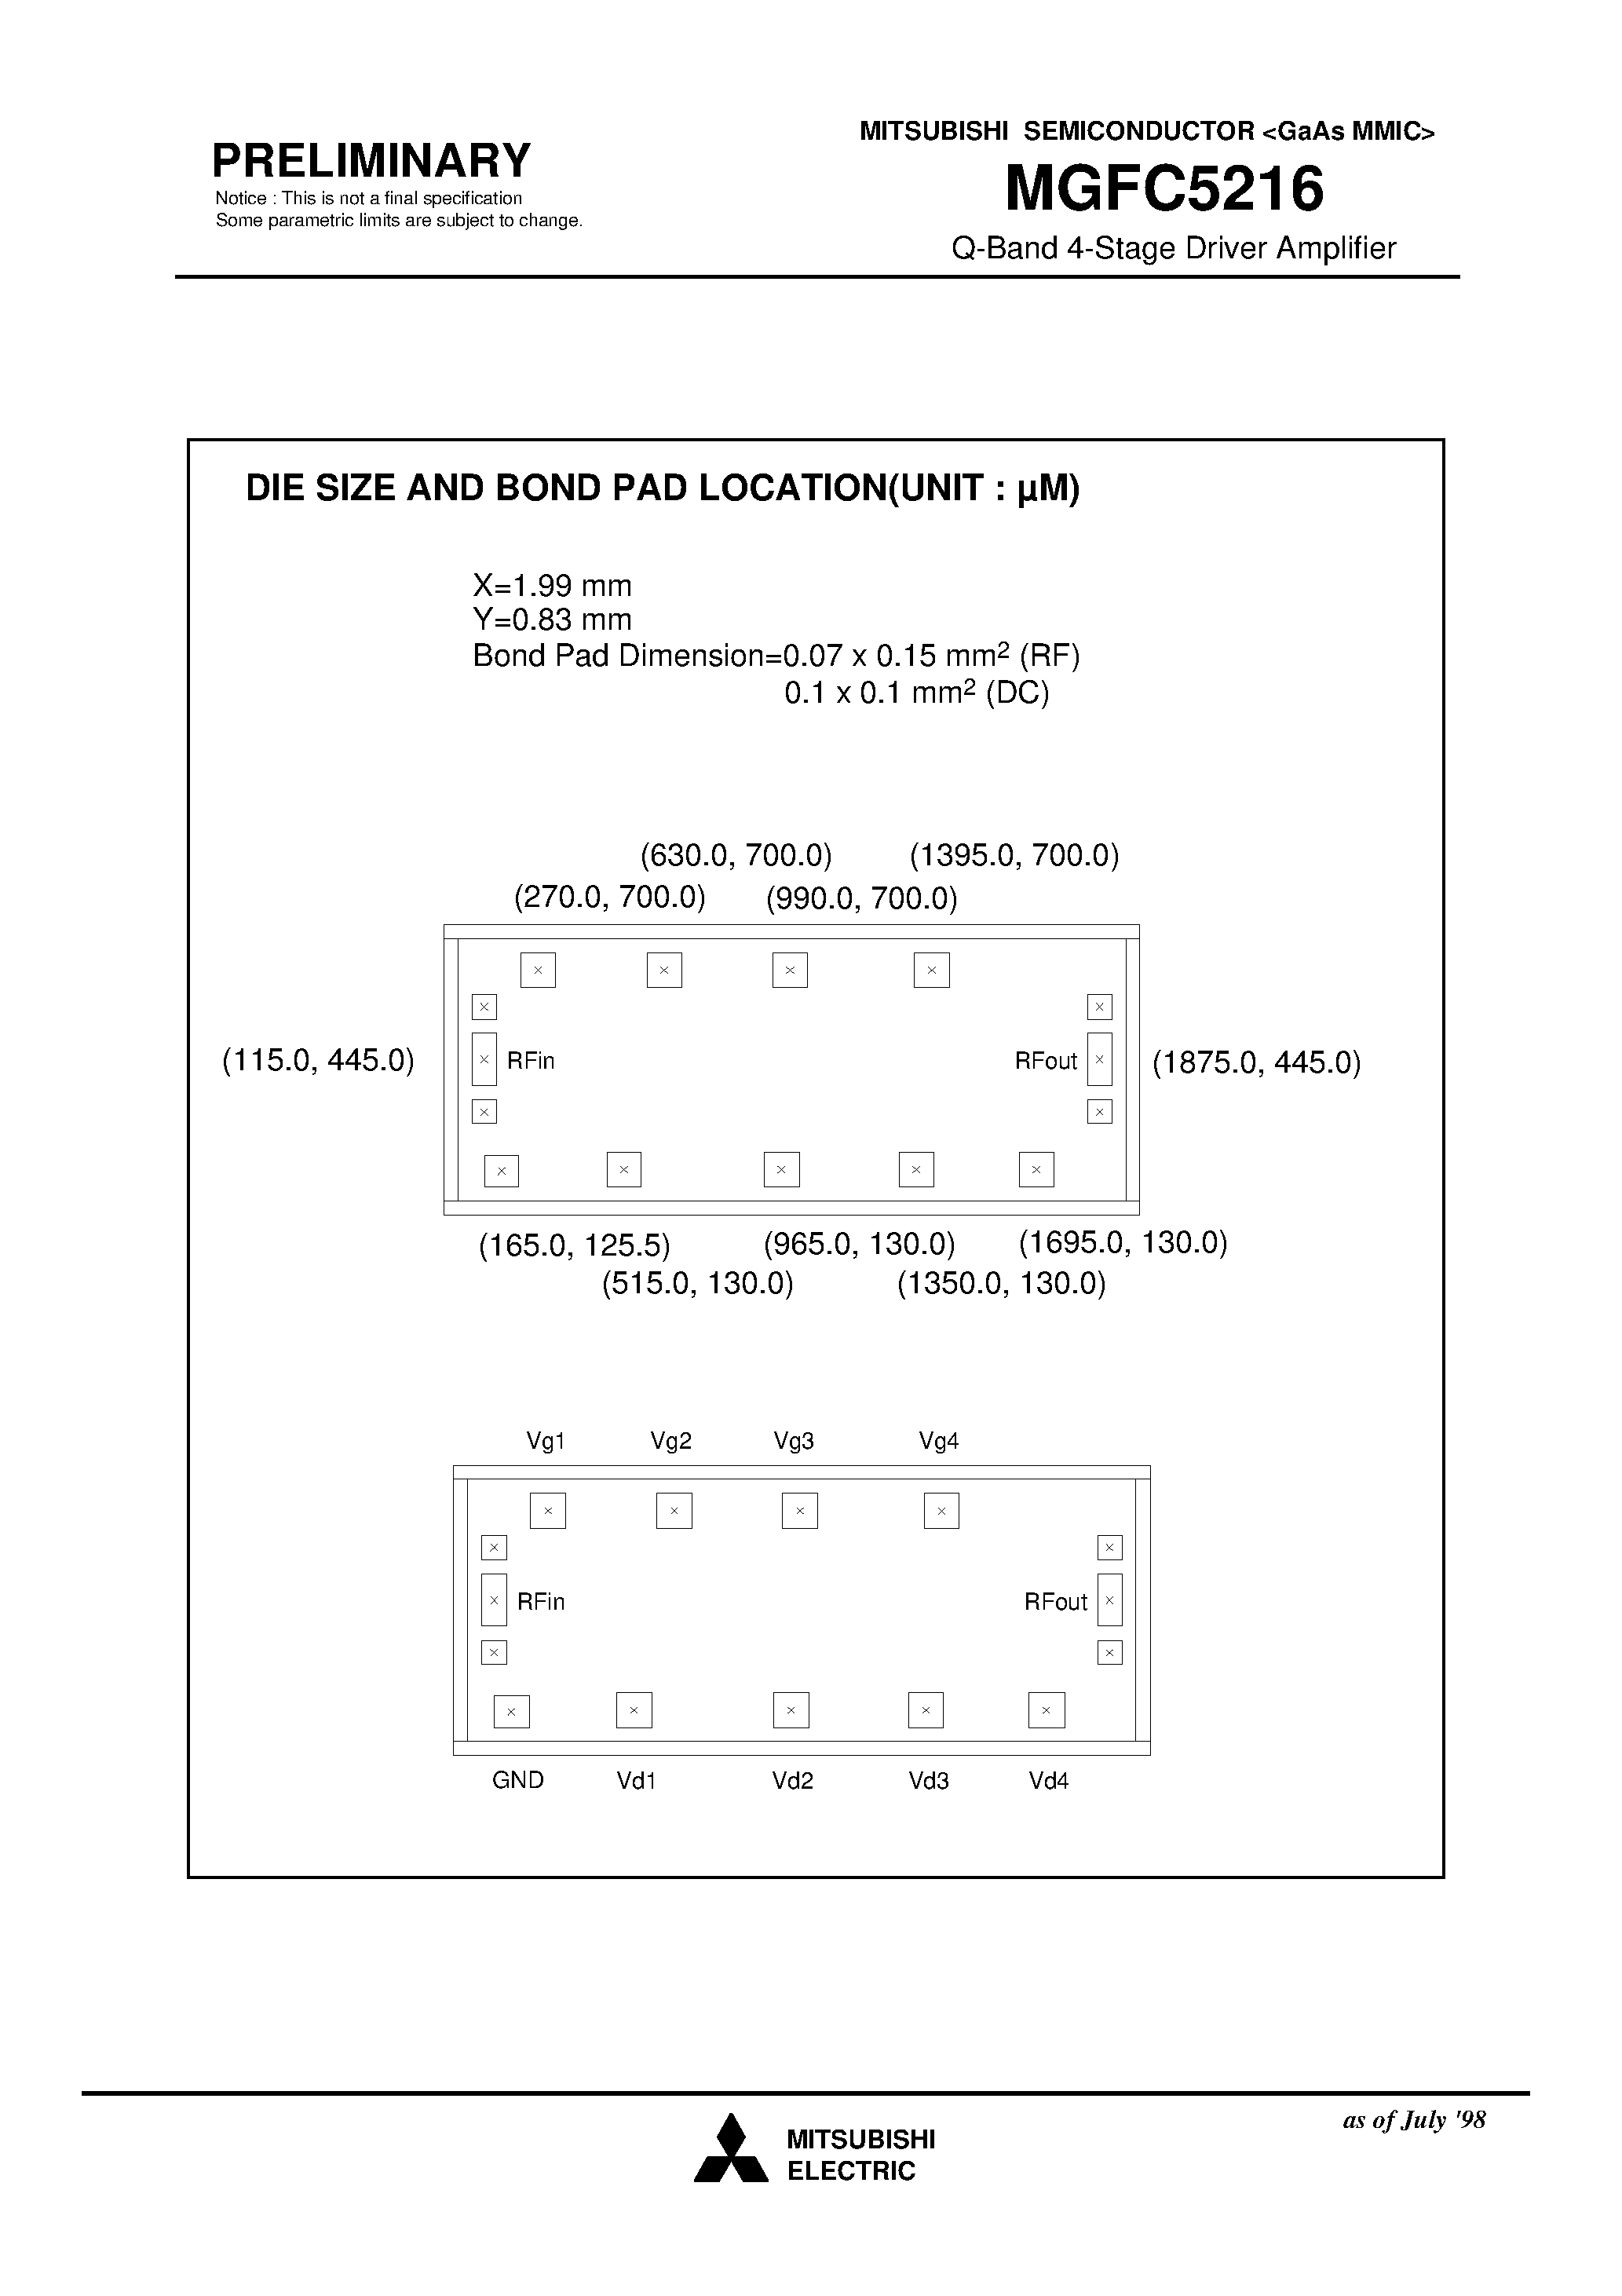 Datasheet MGFC5216 - Q-Band 4-Stage Driver Amplifier page 2